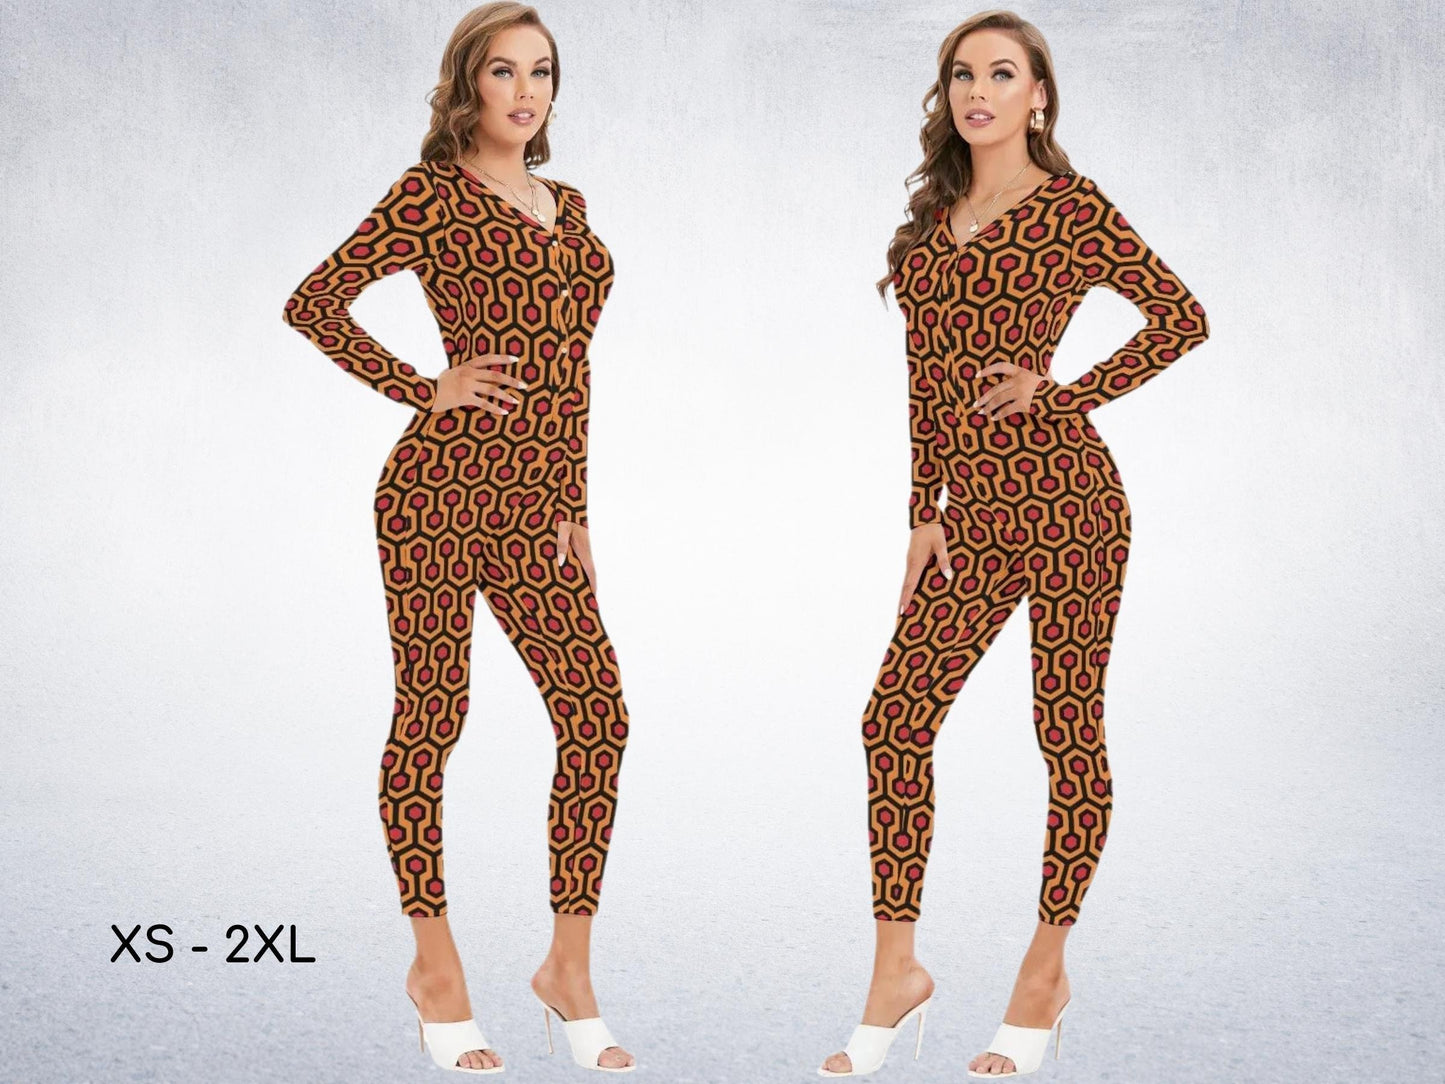 The Scary Hotel Inspired Women's Plunging Neck Jumpsuit, The Stanley Hotel, Overlook, Horror, Cosplay Jumpsuit, Halloween Outfit,